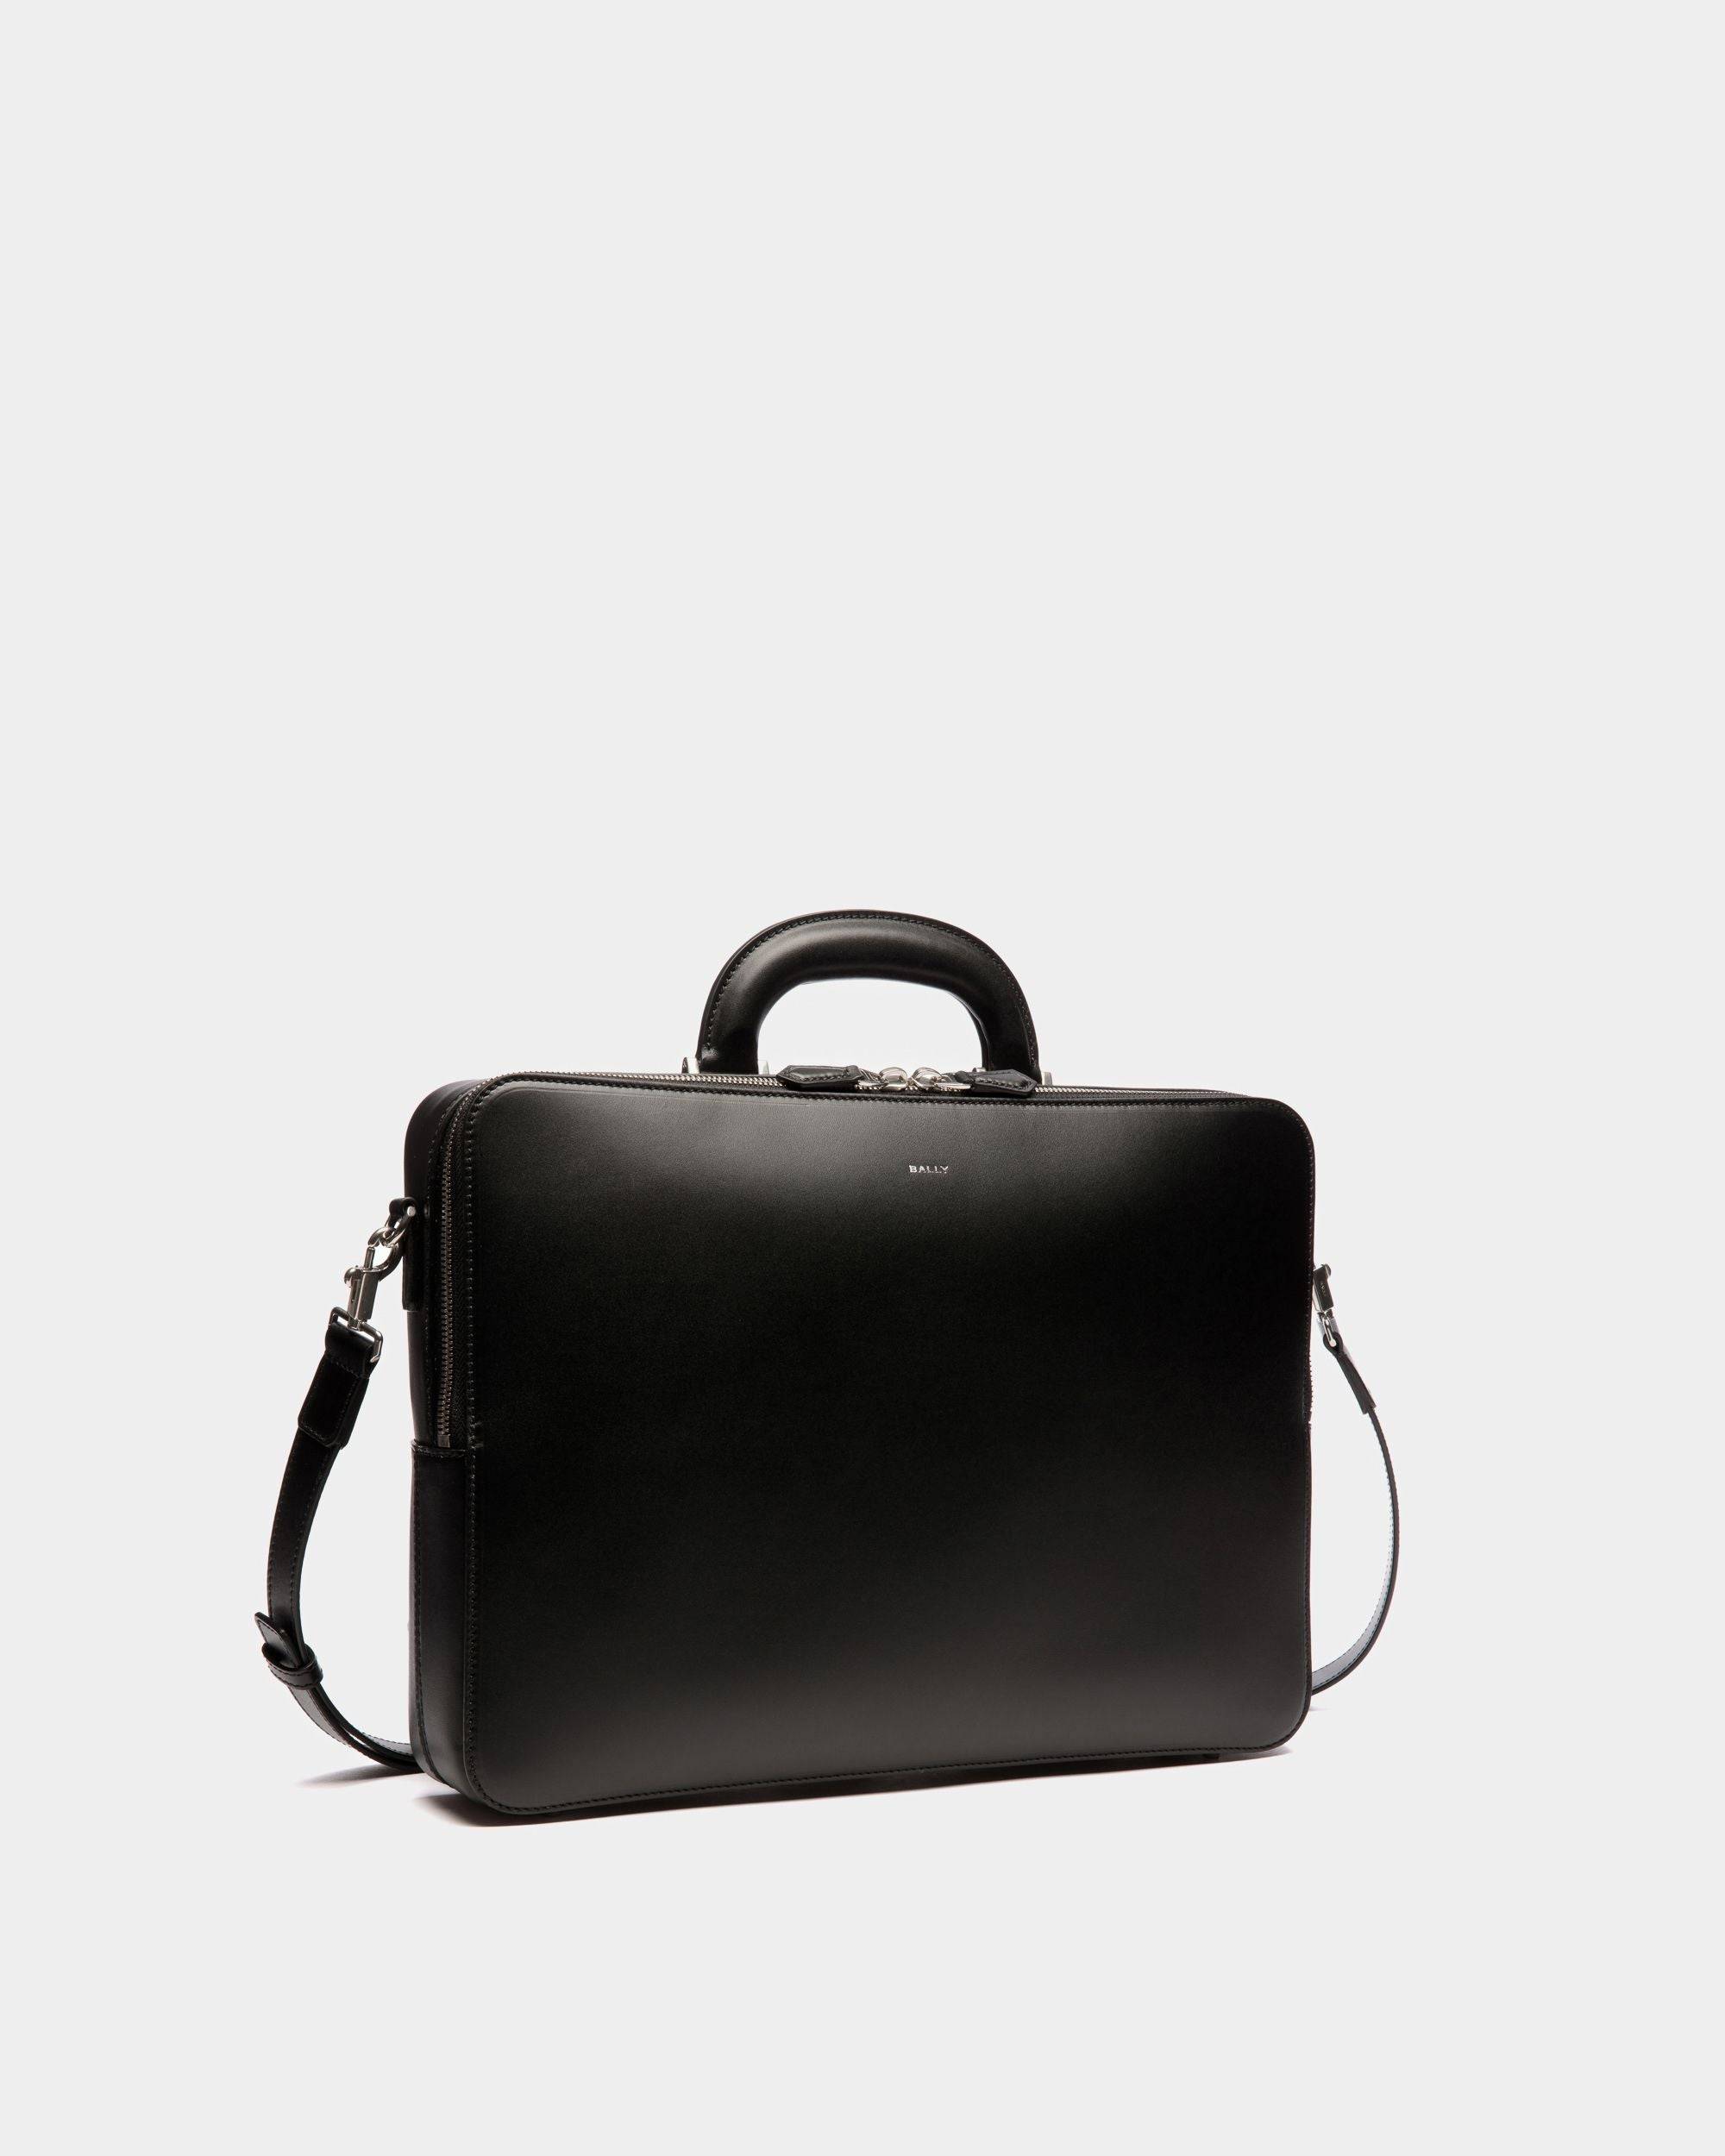 Busy Bally Briefcase in Black Leather - Men's - Bally - 03